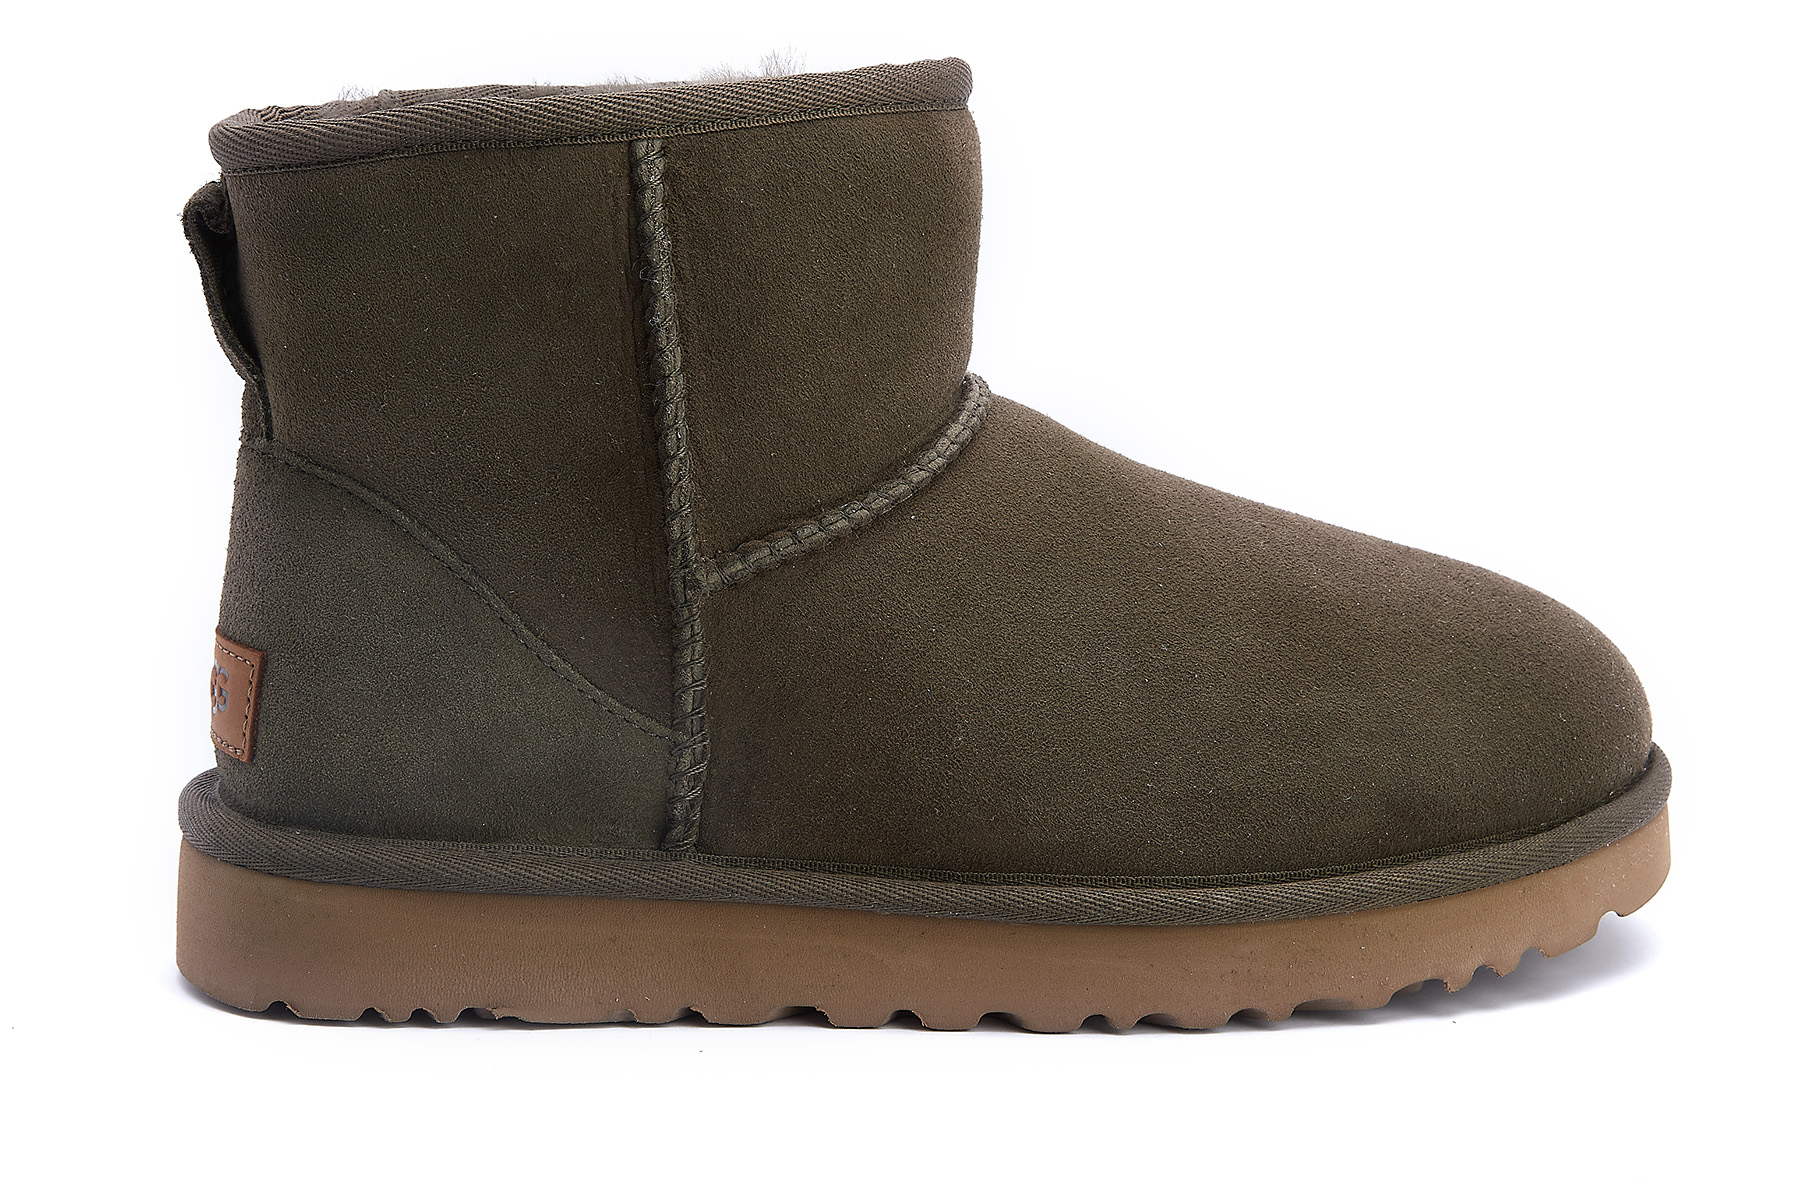 Women's Insulated Ankle Boots UGG Classic Mini II Eucalypt.Spray | Apia